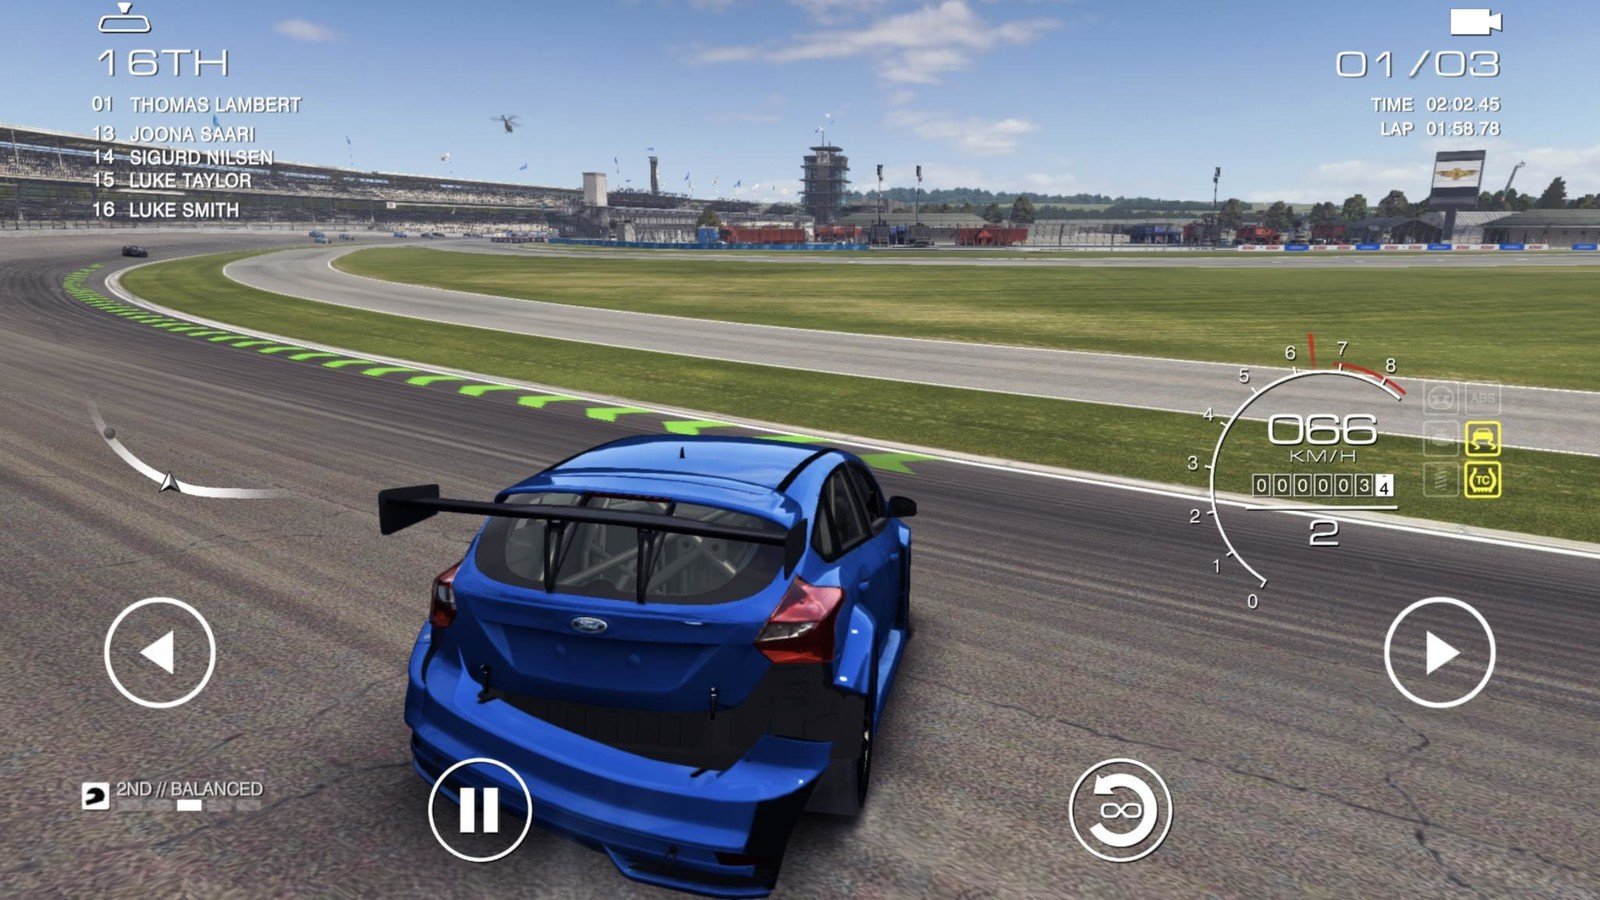 Grid Autosport multiplayer beta races onto iOS, but it's only